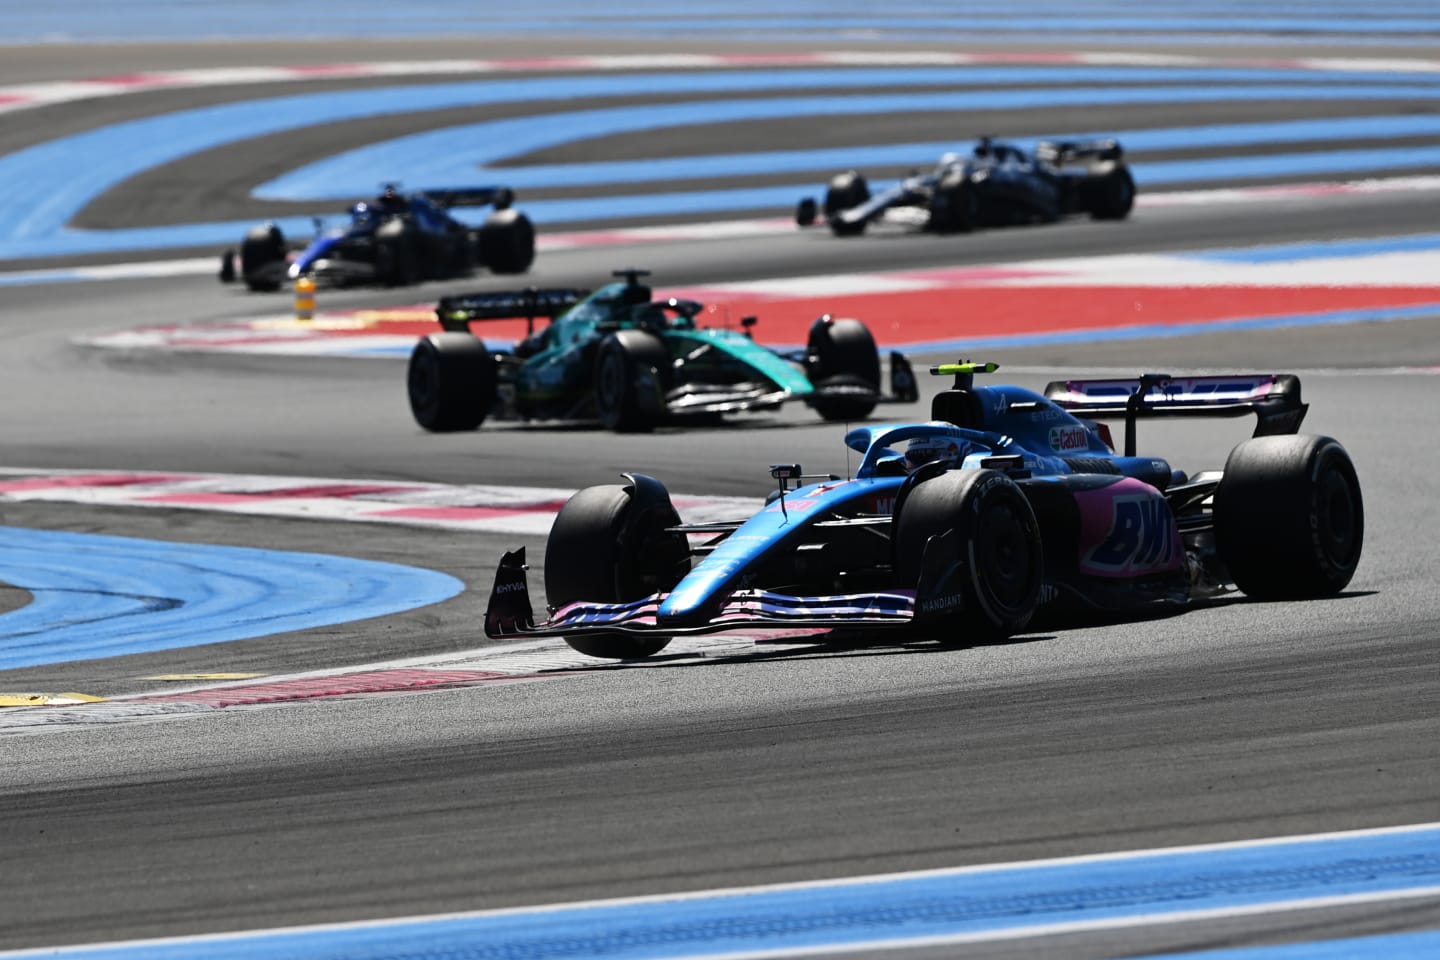 LE CASTELLET, FRANCE - JULY 24: Esteban Ocon of France driving the (31) Alpine F1 A522 Renault leads Lance Stroll of Canada driving the (18) Aston Martin AMR22 Mercedes during the F1 Grand Prix of France at Circuit Paul Ricard on July 24, 2022 in Le Castellet, France. (Photo by Dan Mullan/Getty Images)